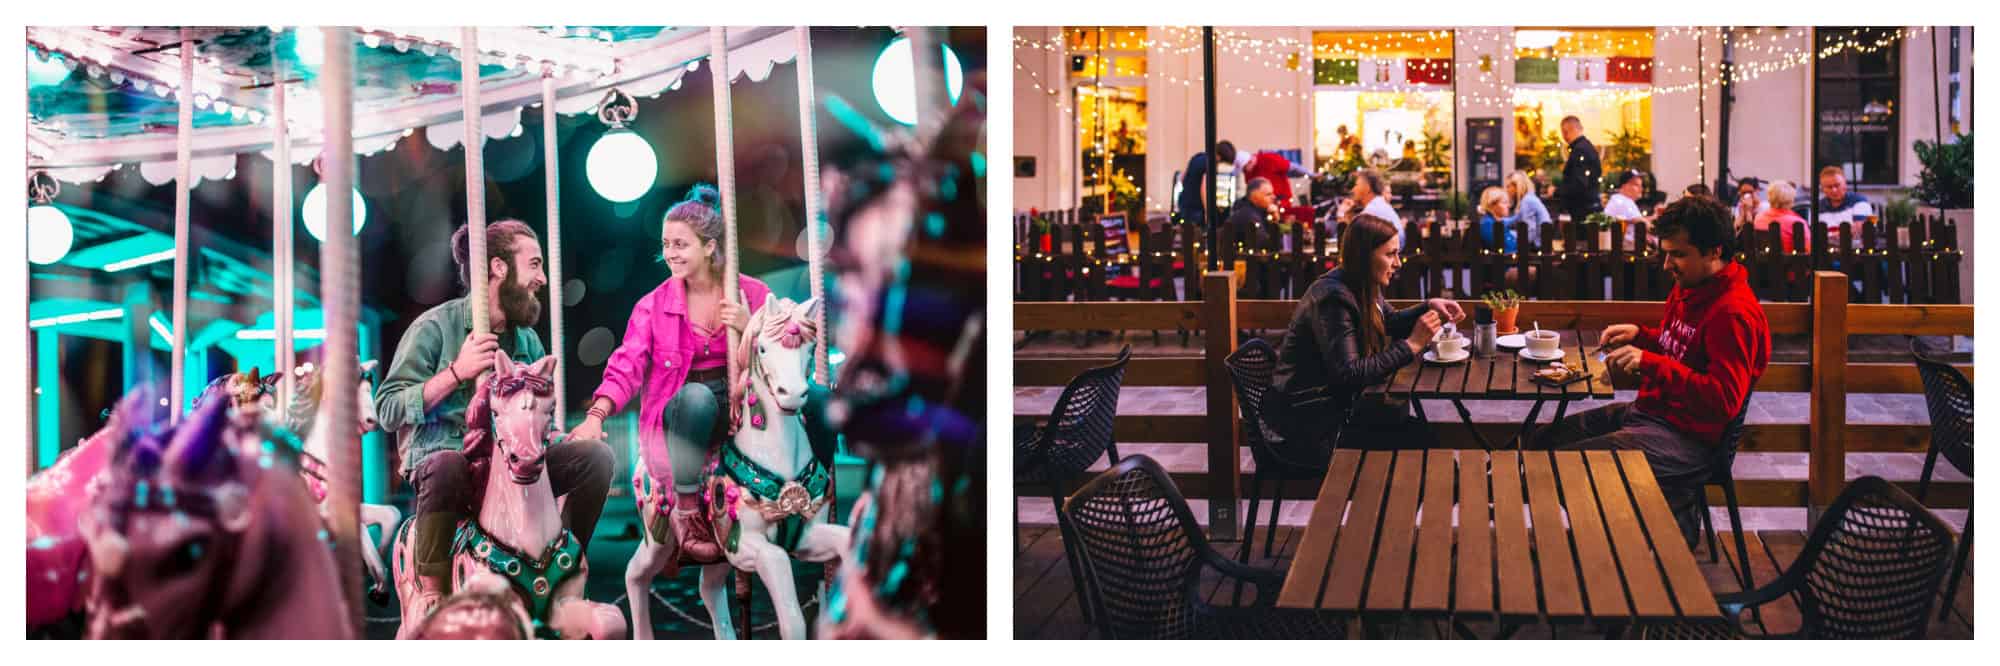 Paris has lots of date spots, including picturesque merry-go-rounds like the one this smiling couple if riding (left), as well as restaurants and bars (right).